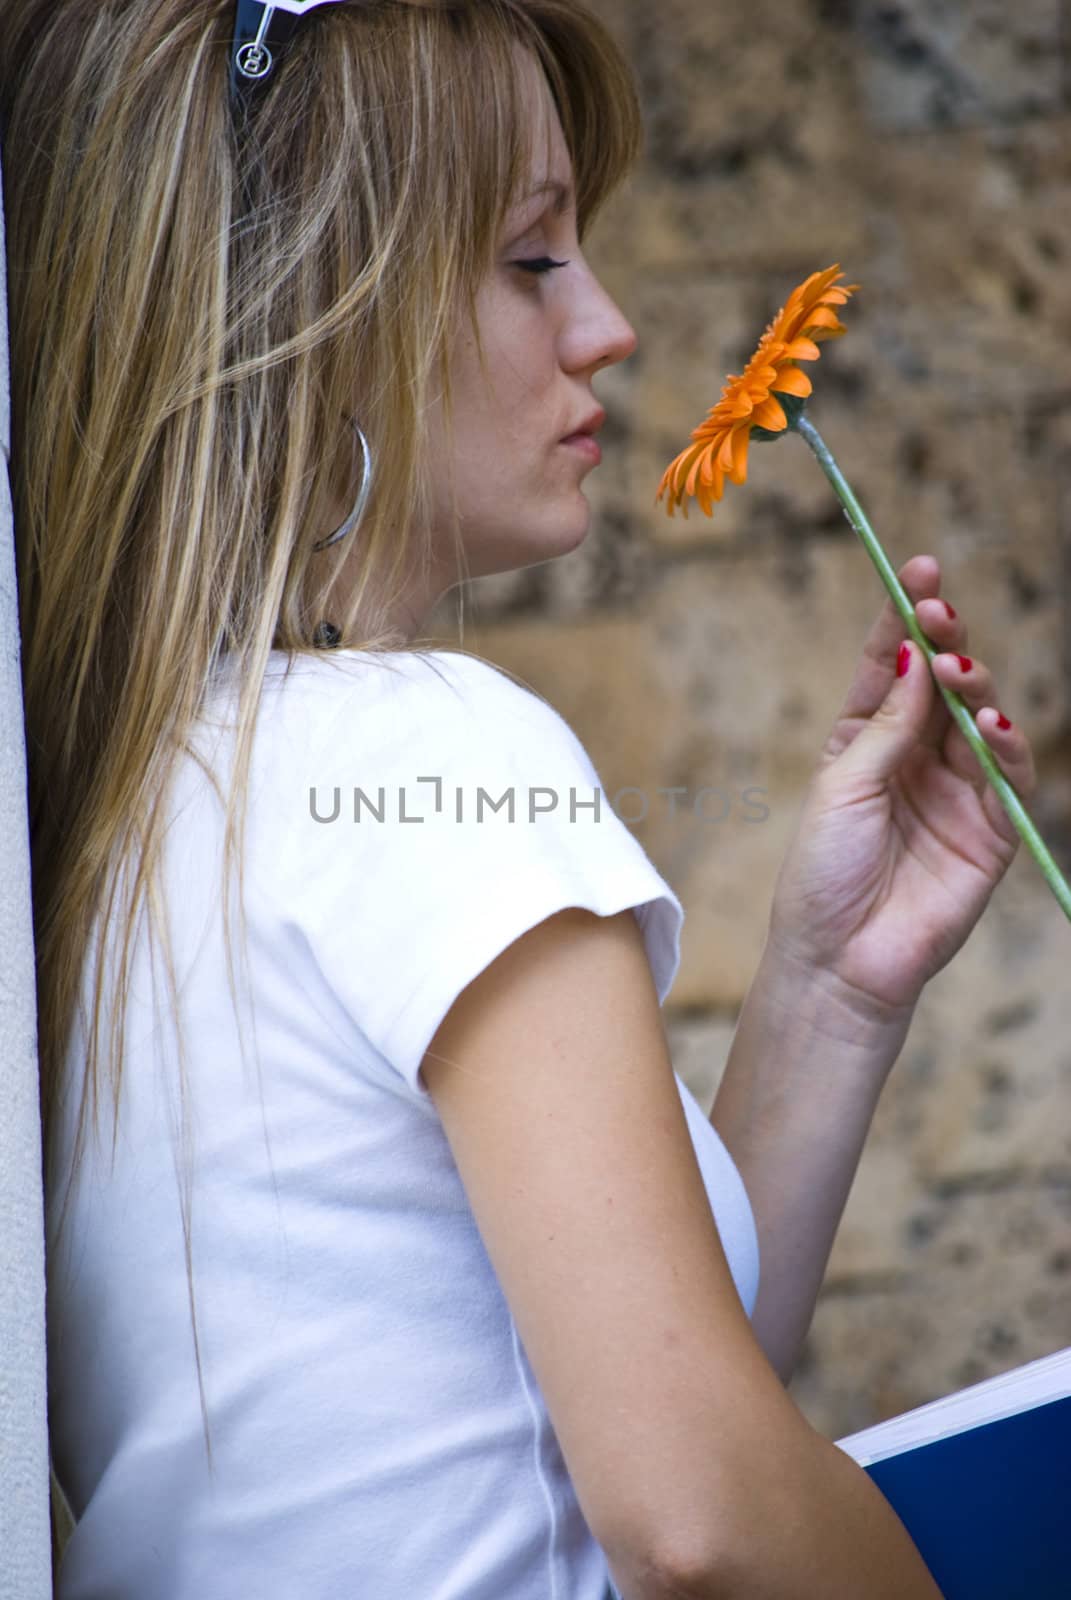 beautiful young blonde woman with flower